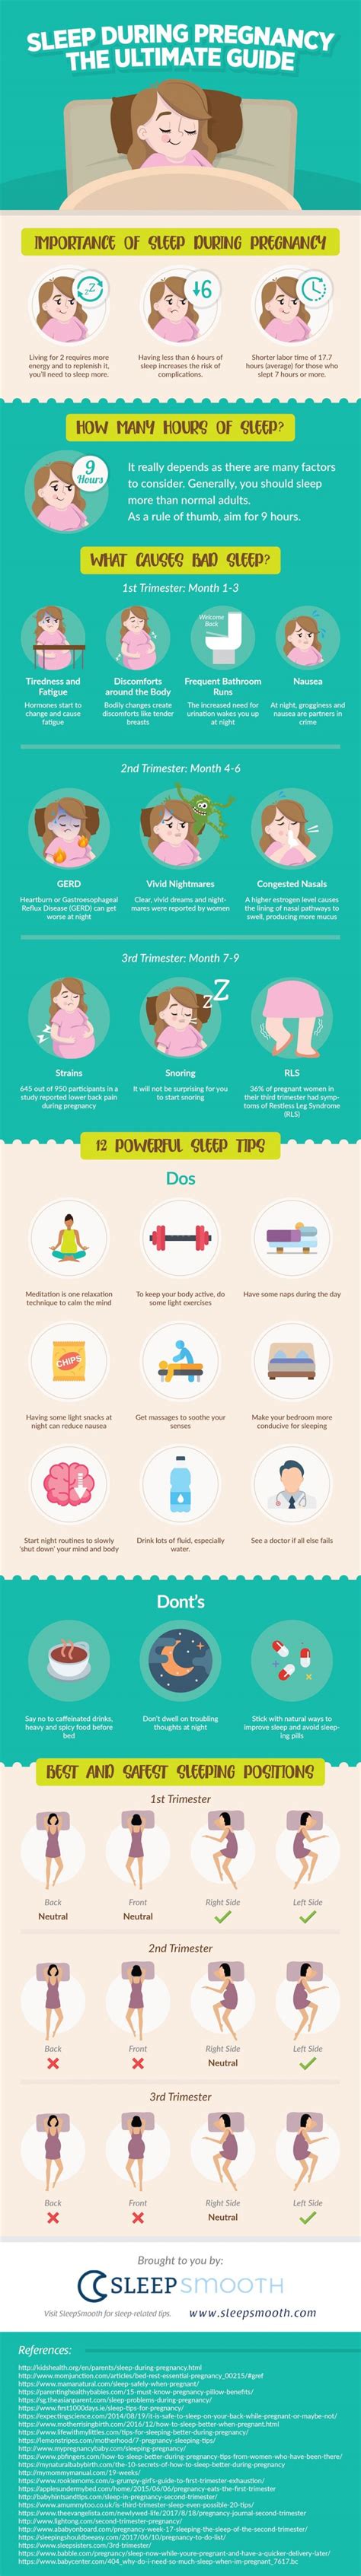 How To Sleep During Pregnancy The Ultimate Guide Plus Infographic